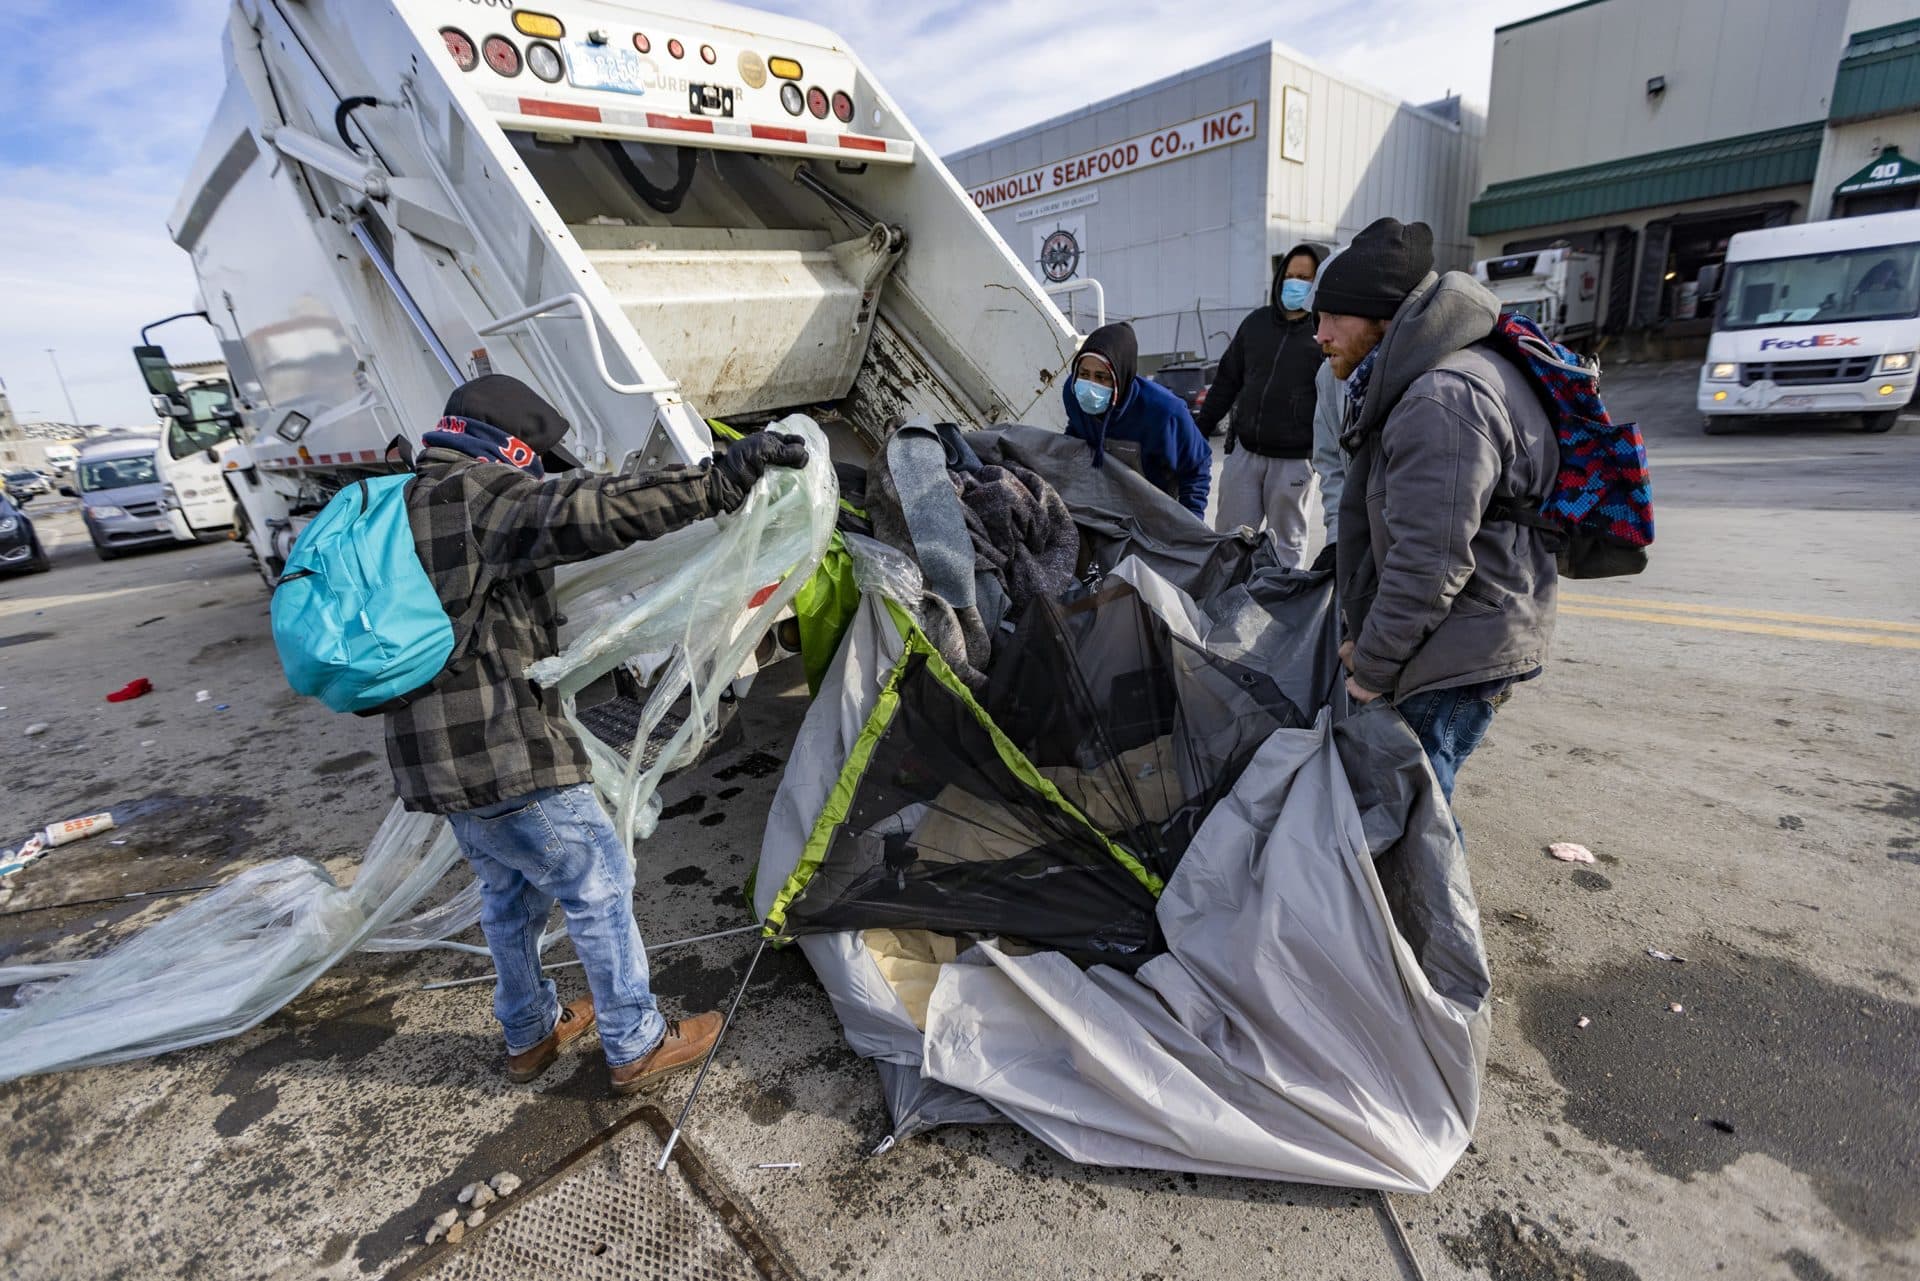 Volunteer shelter workers throw part of a tent and debris into a garbage truck at the Newmarket Triangle. (Jesse Costa/WBUR)